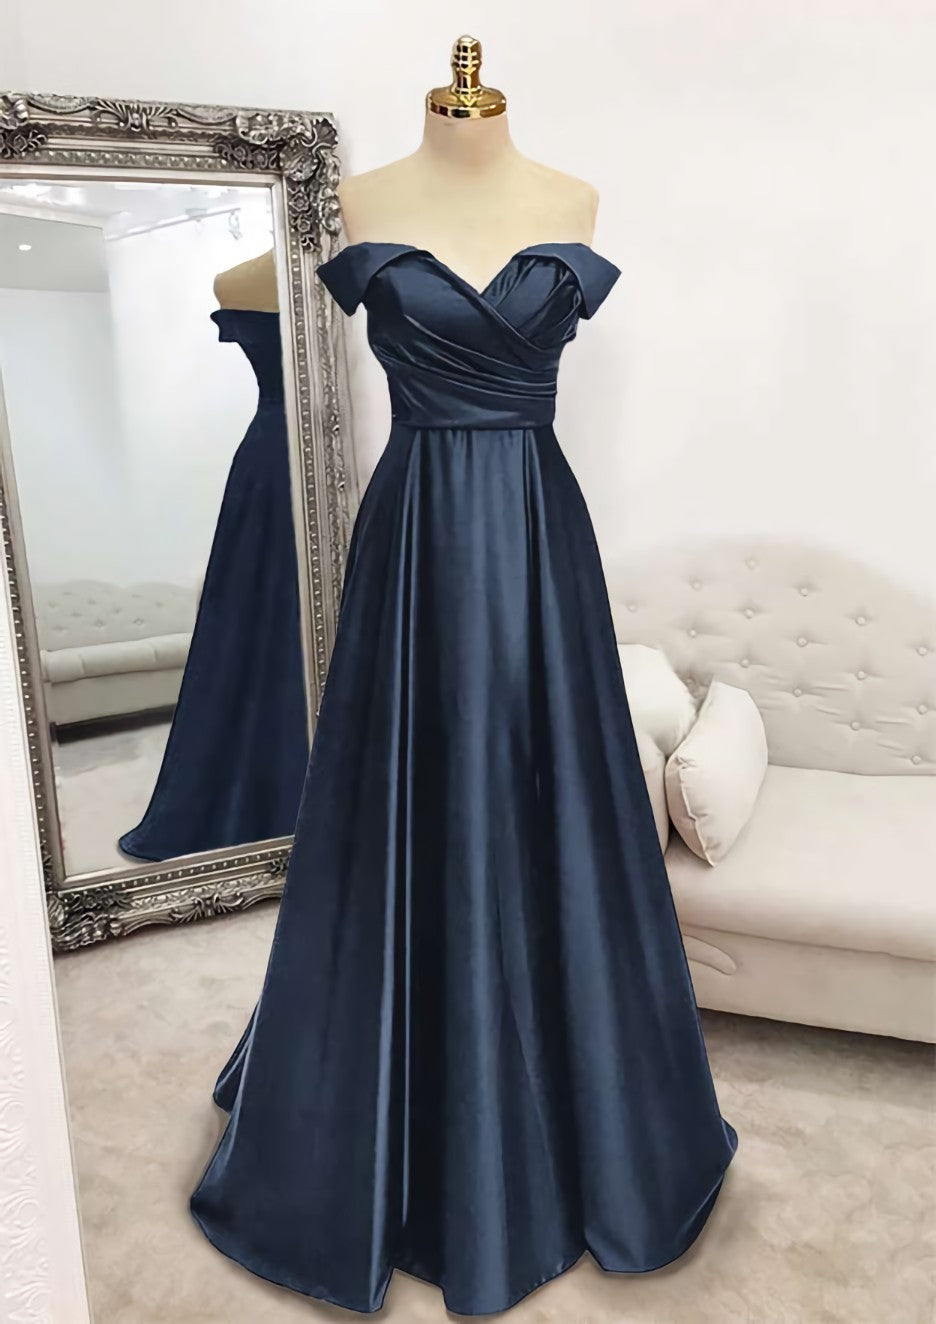 A Line Off The Shoulder Sleeveless Long Floor Length Satin Prom Dress Outfits For Women With Pleated